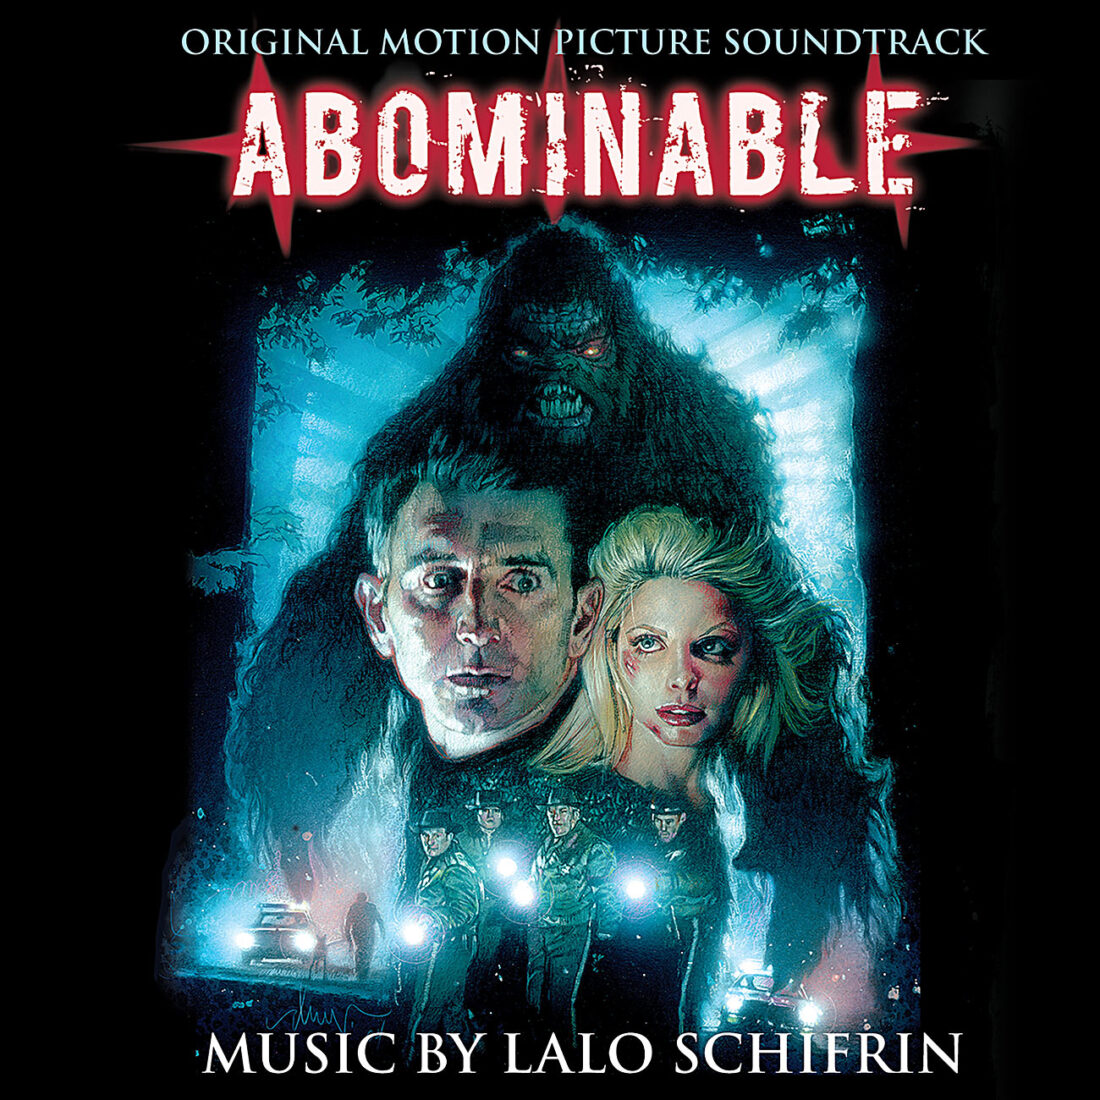 Abominable Original Motion Picture Soundtrack Music by Lalo Schifrin CD Edition with Drew Strusan Package Art